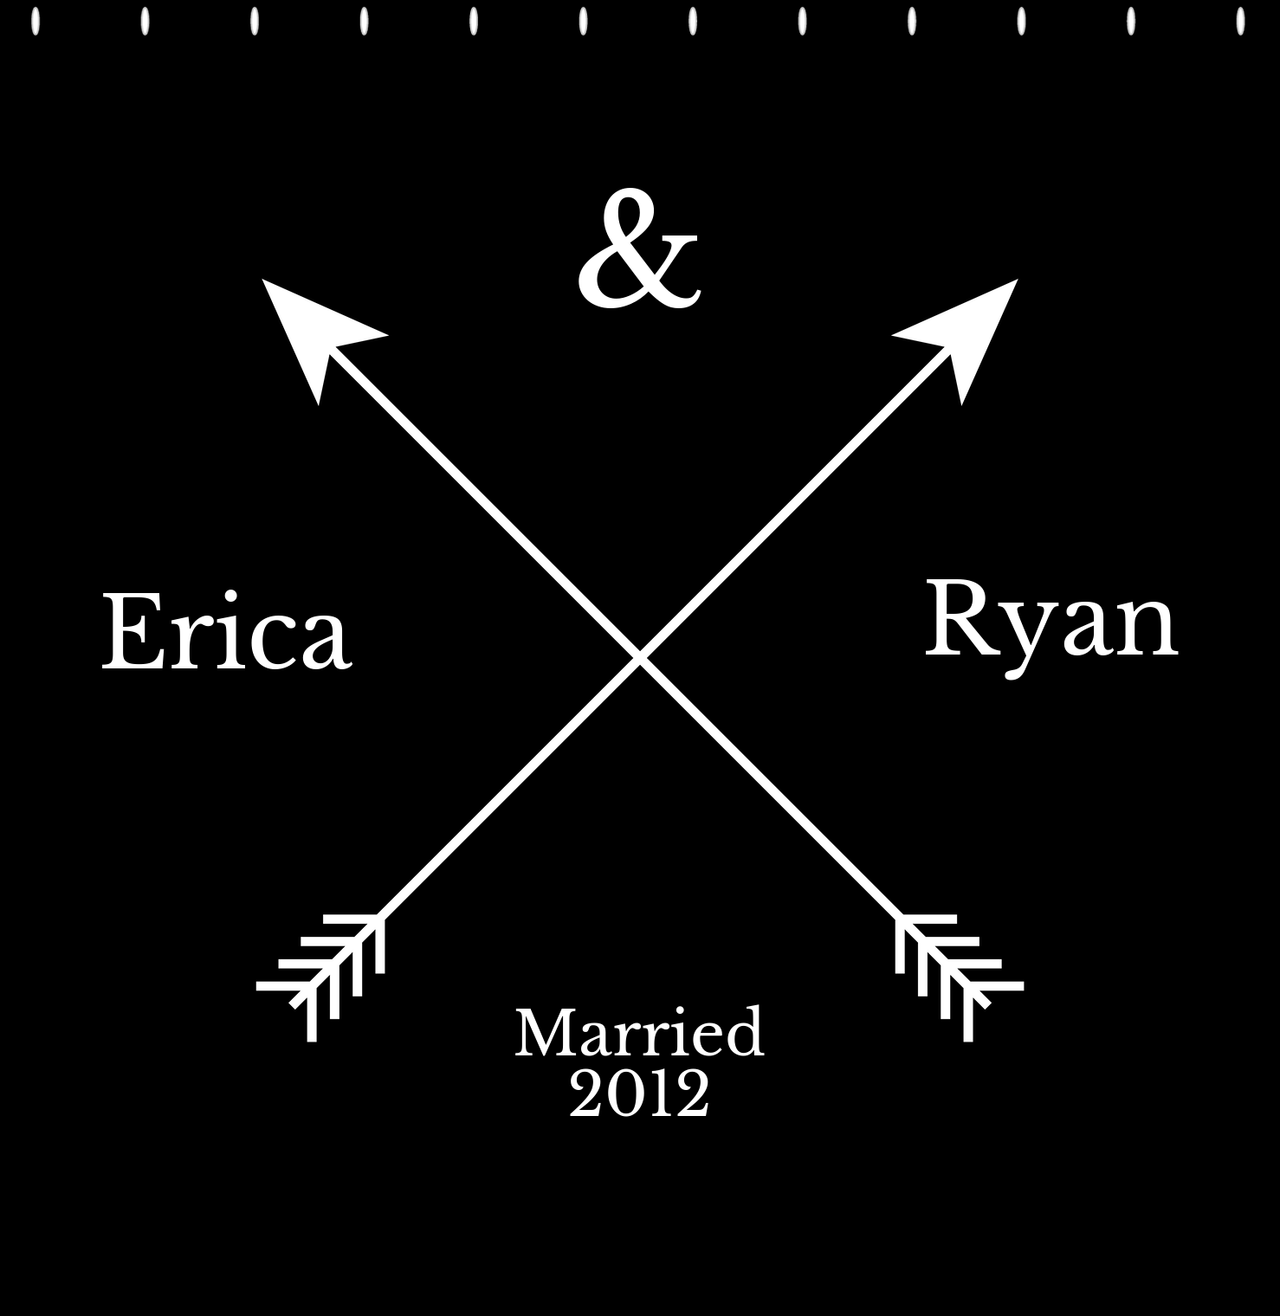 Personalized Arrows Shower Curtain - Black and White - Couple Names with Wedding Year - Decorate View